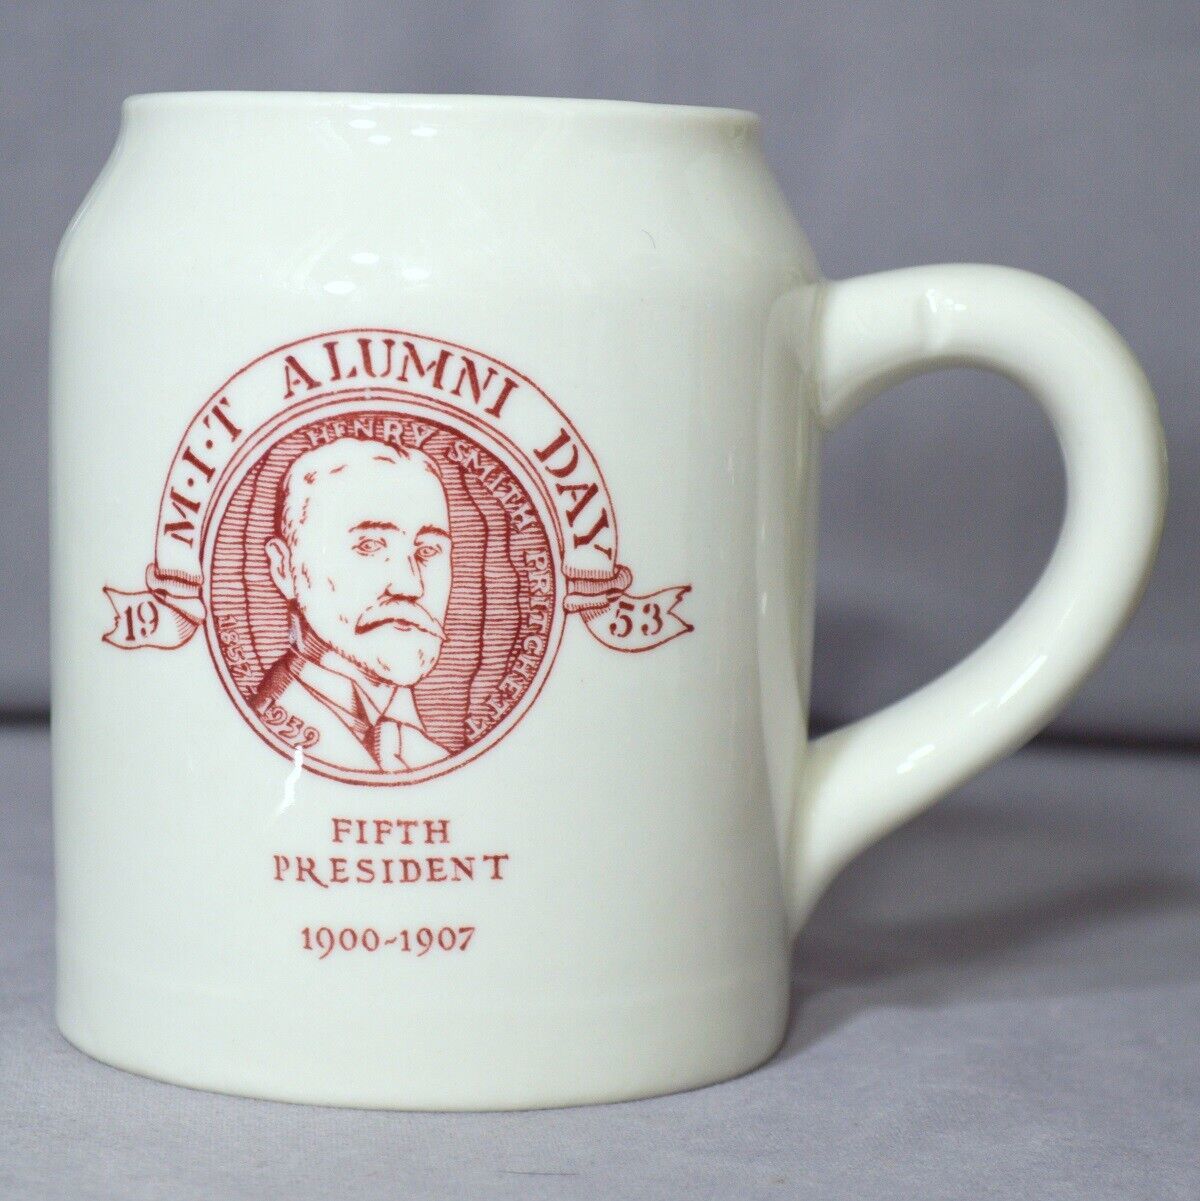 Primary image for Massachusetts Institute of Technology 1953 Alumni Day Mug or Stein MIT M.I.T.